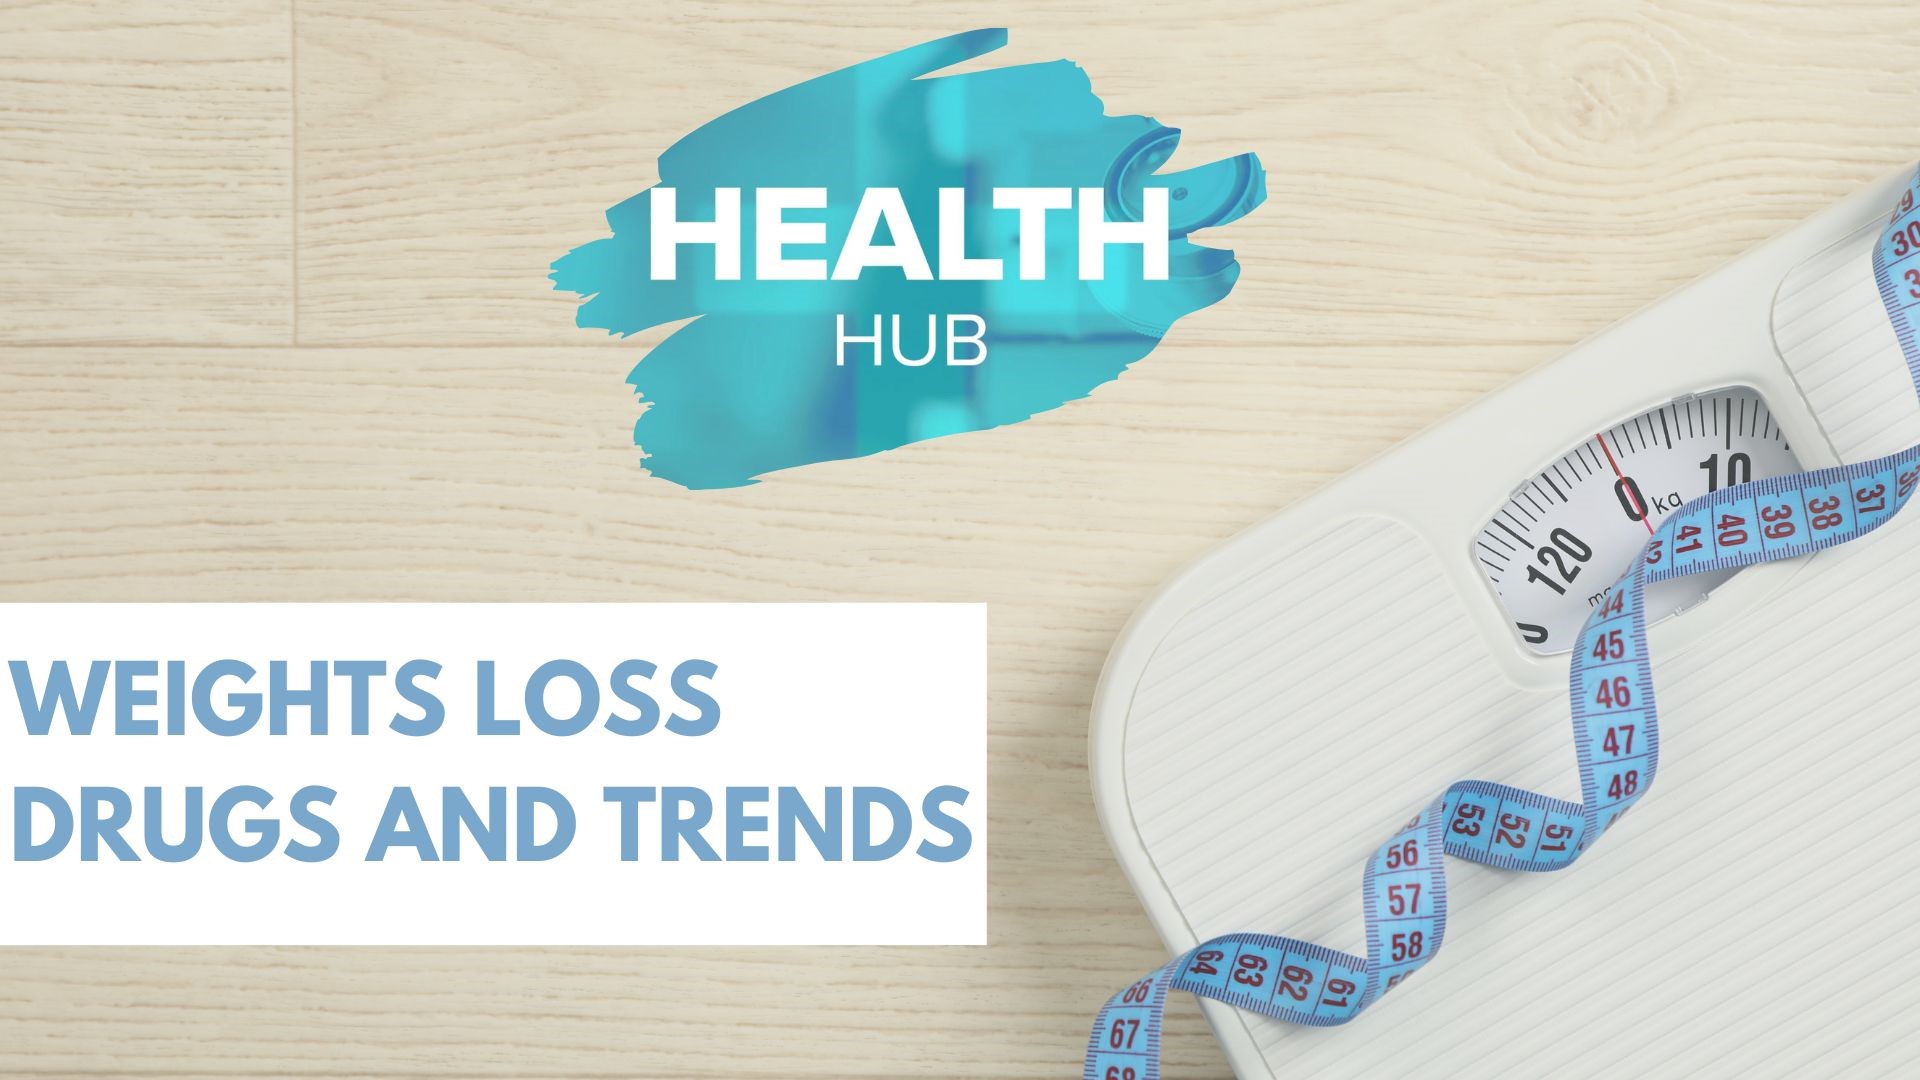 As weight loss drugs gain popularity on TikTok, it is causing issues for people with diabetes. The latest trends and a closer look at the stigma around weight loss.